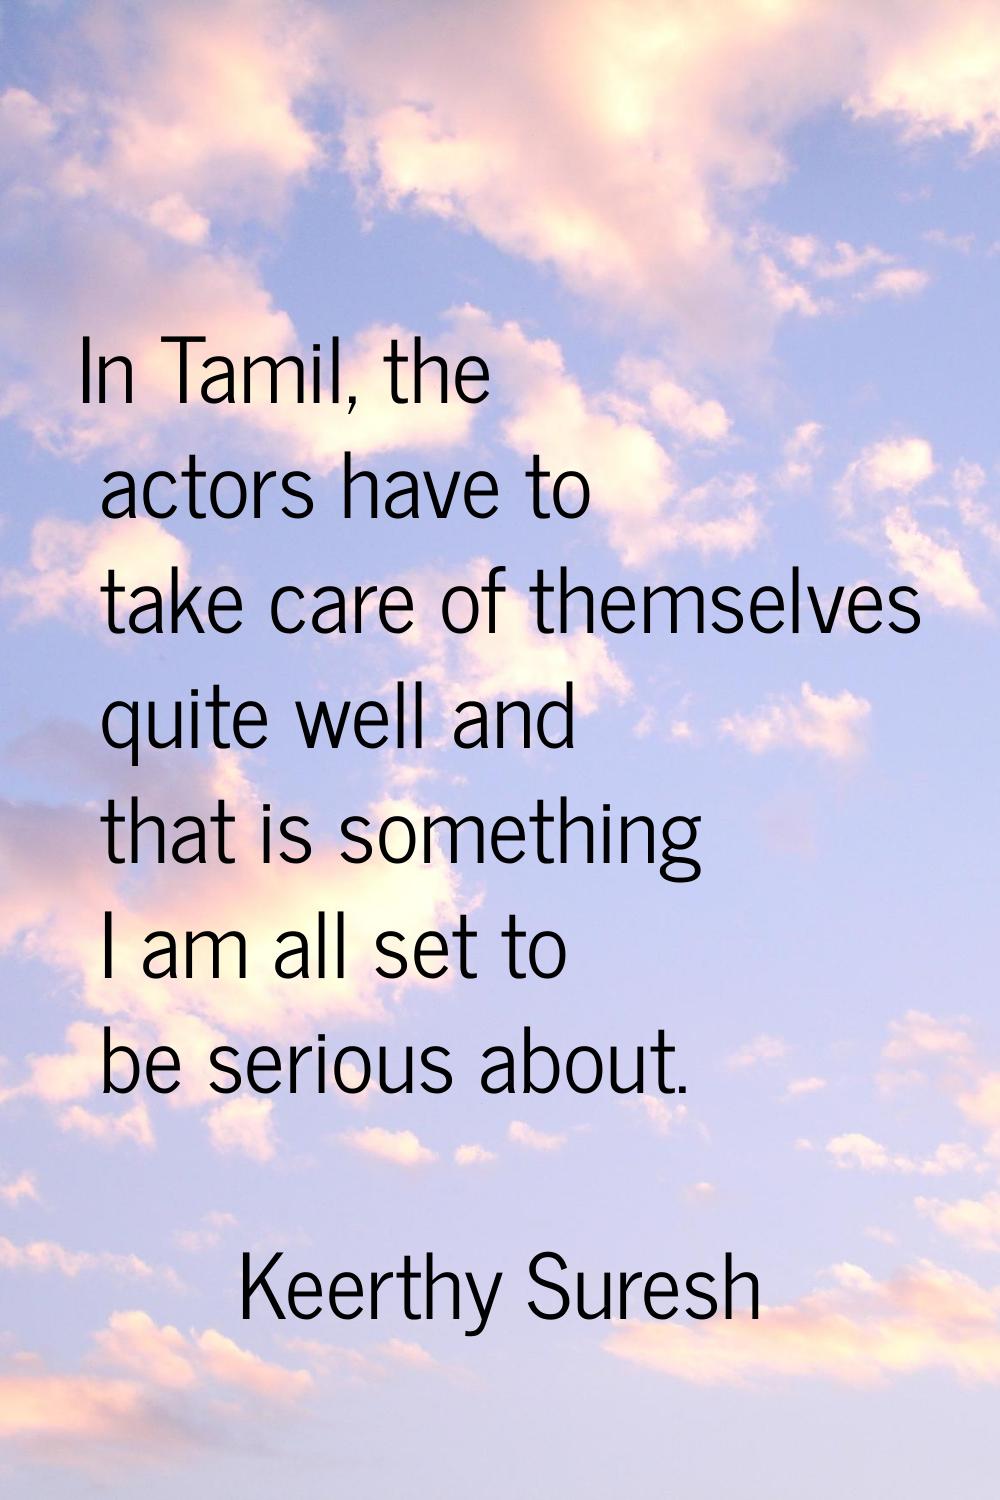 In Tamil, the actors have to take care of themselves quite well and that is something I am all set 